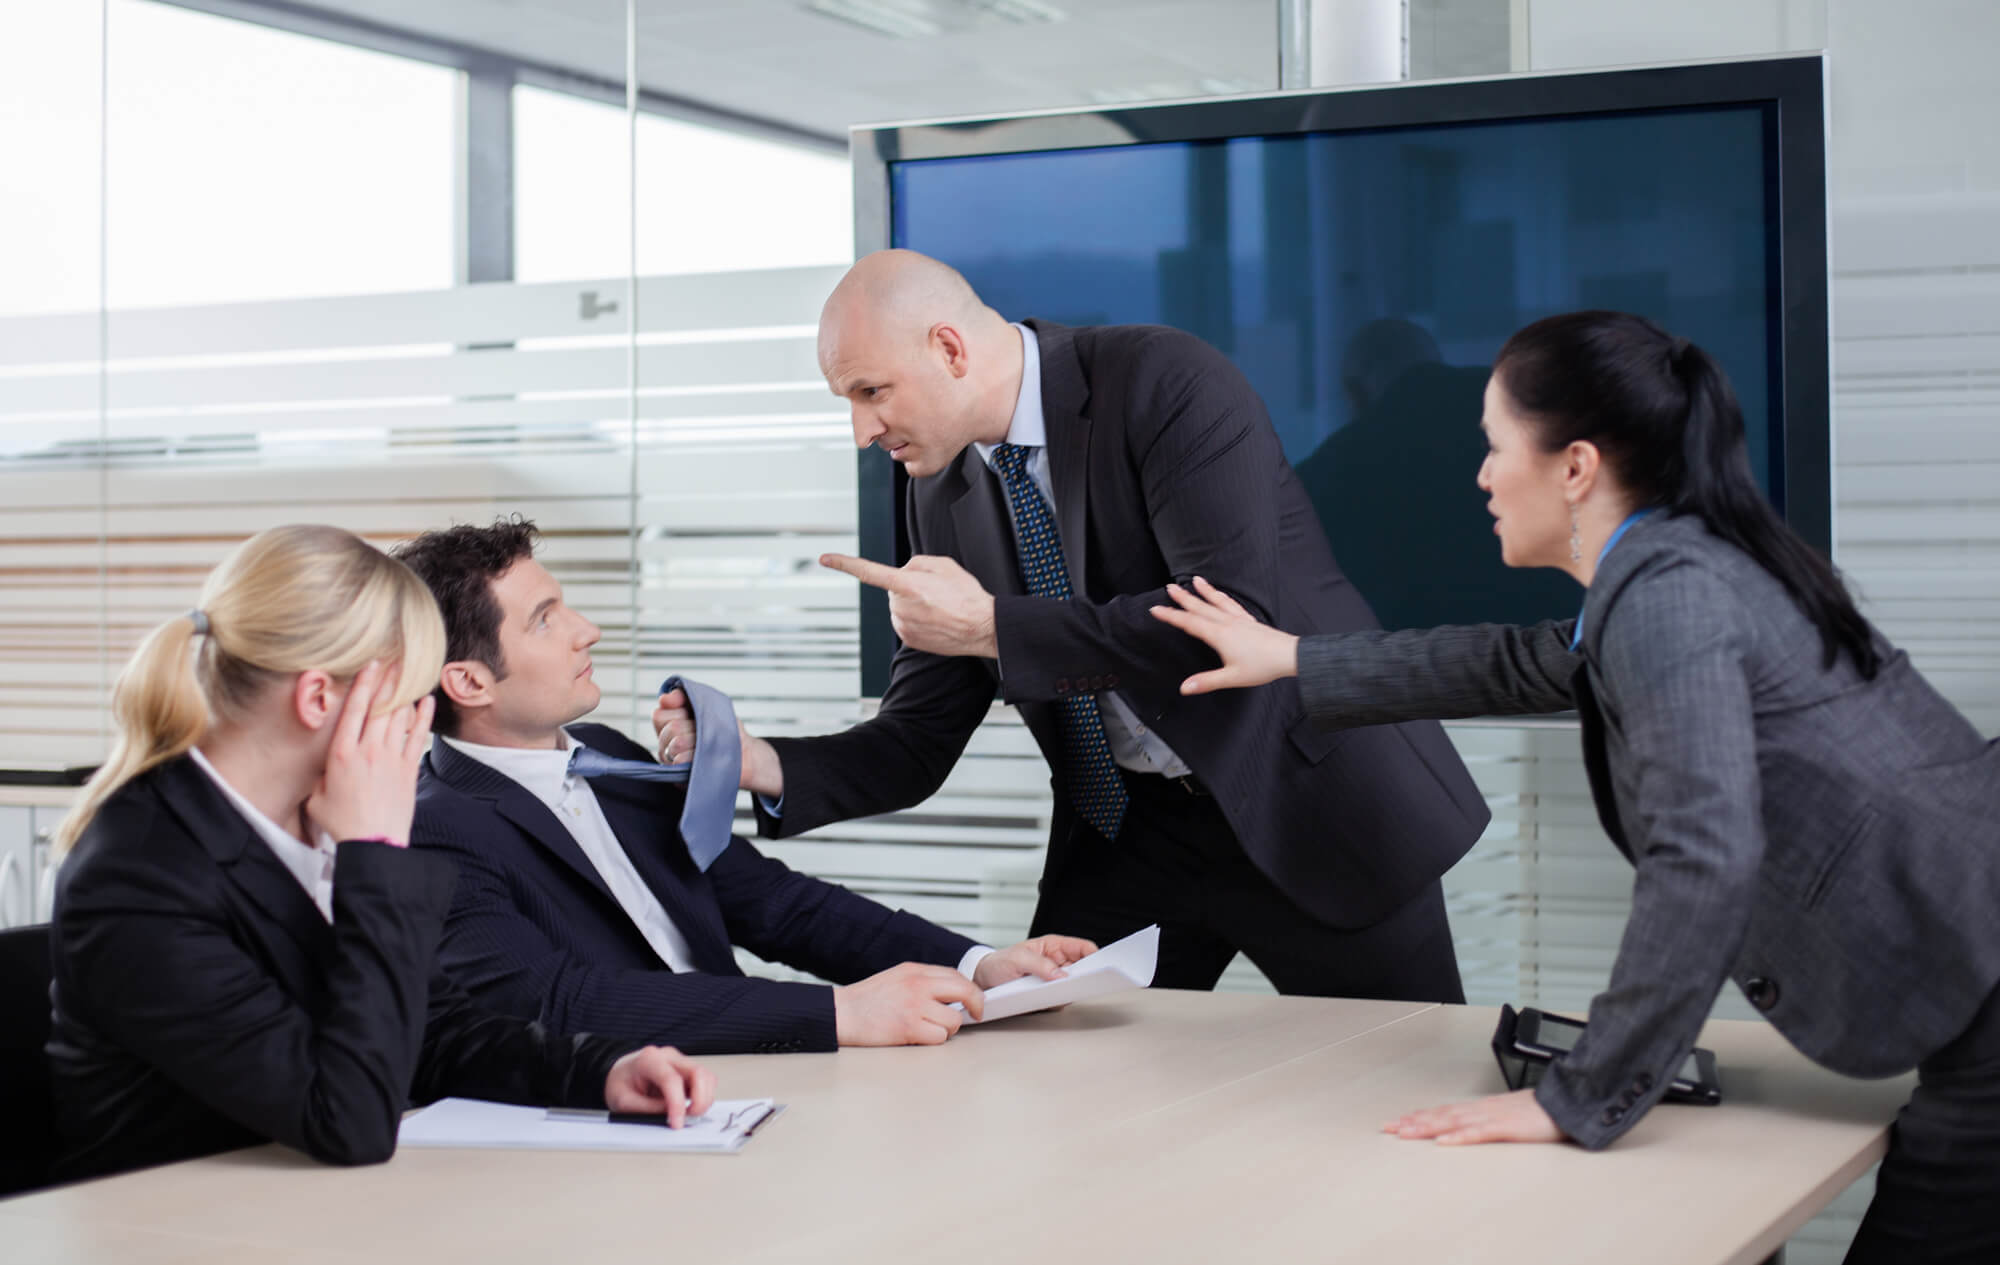 Could anger management classes be the answer to workplace bullying?